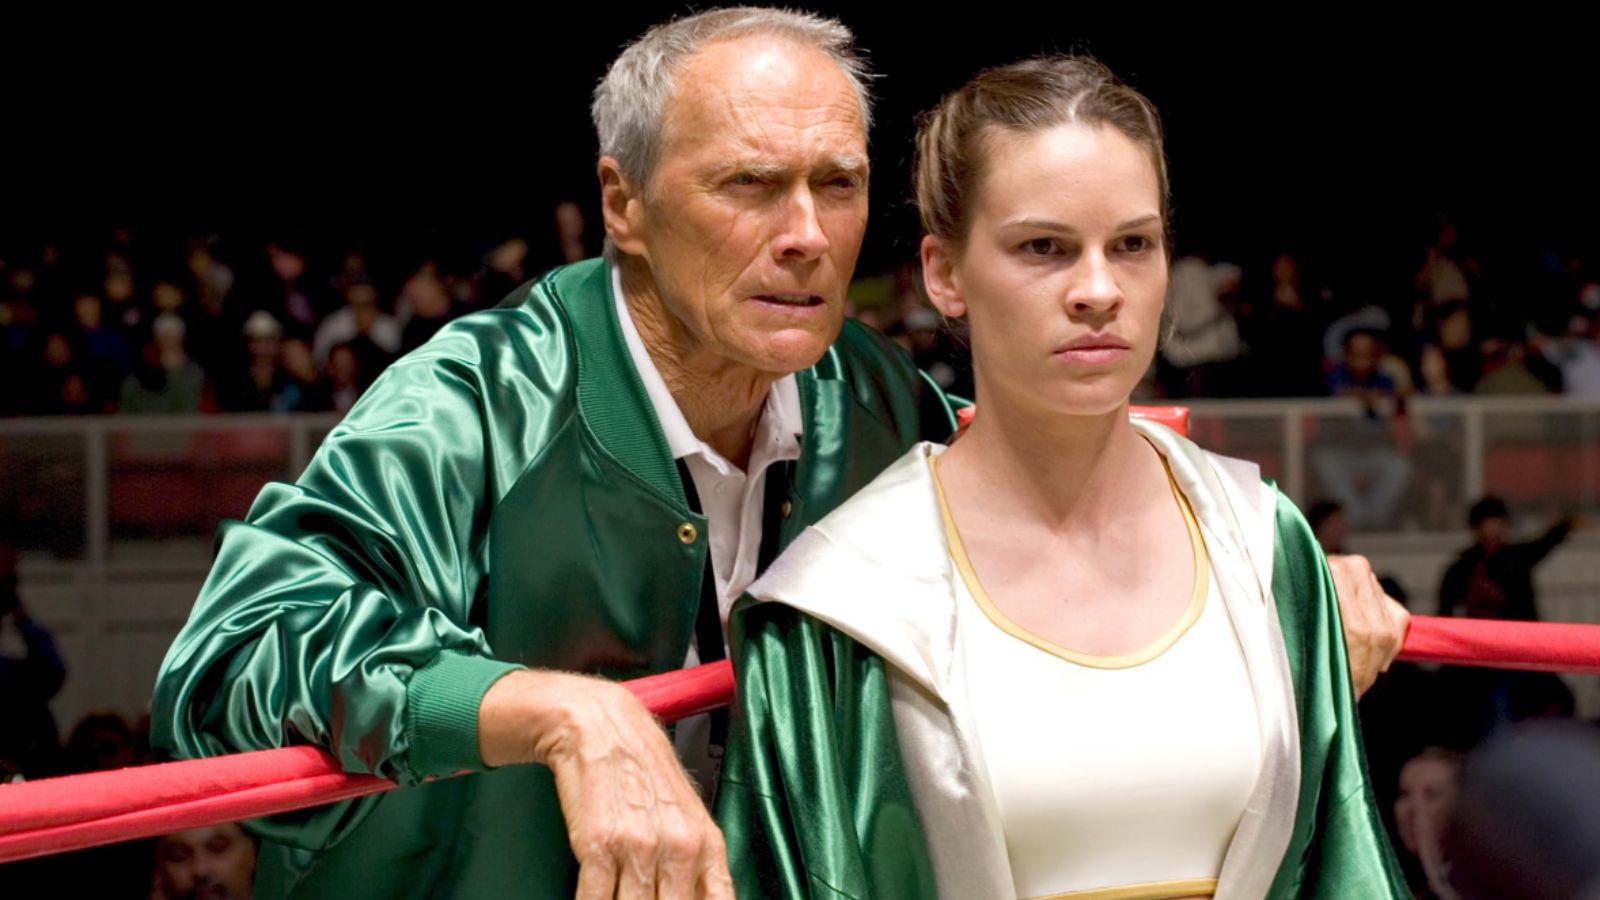 <p>An emotional rollercoaster that looks at the relationship between a tough boxing coach and a headstrong female boxer. The way this film portrays sacrifice, the strength and commitment of relationships, and heartbreak can be profoundly moving.</p>